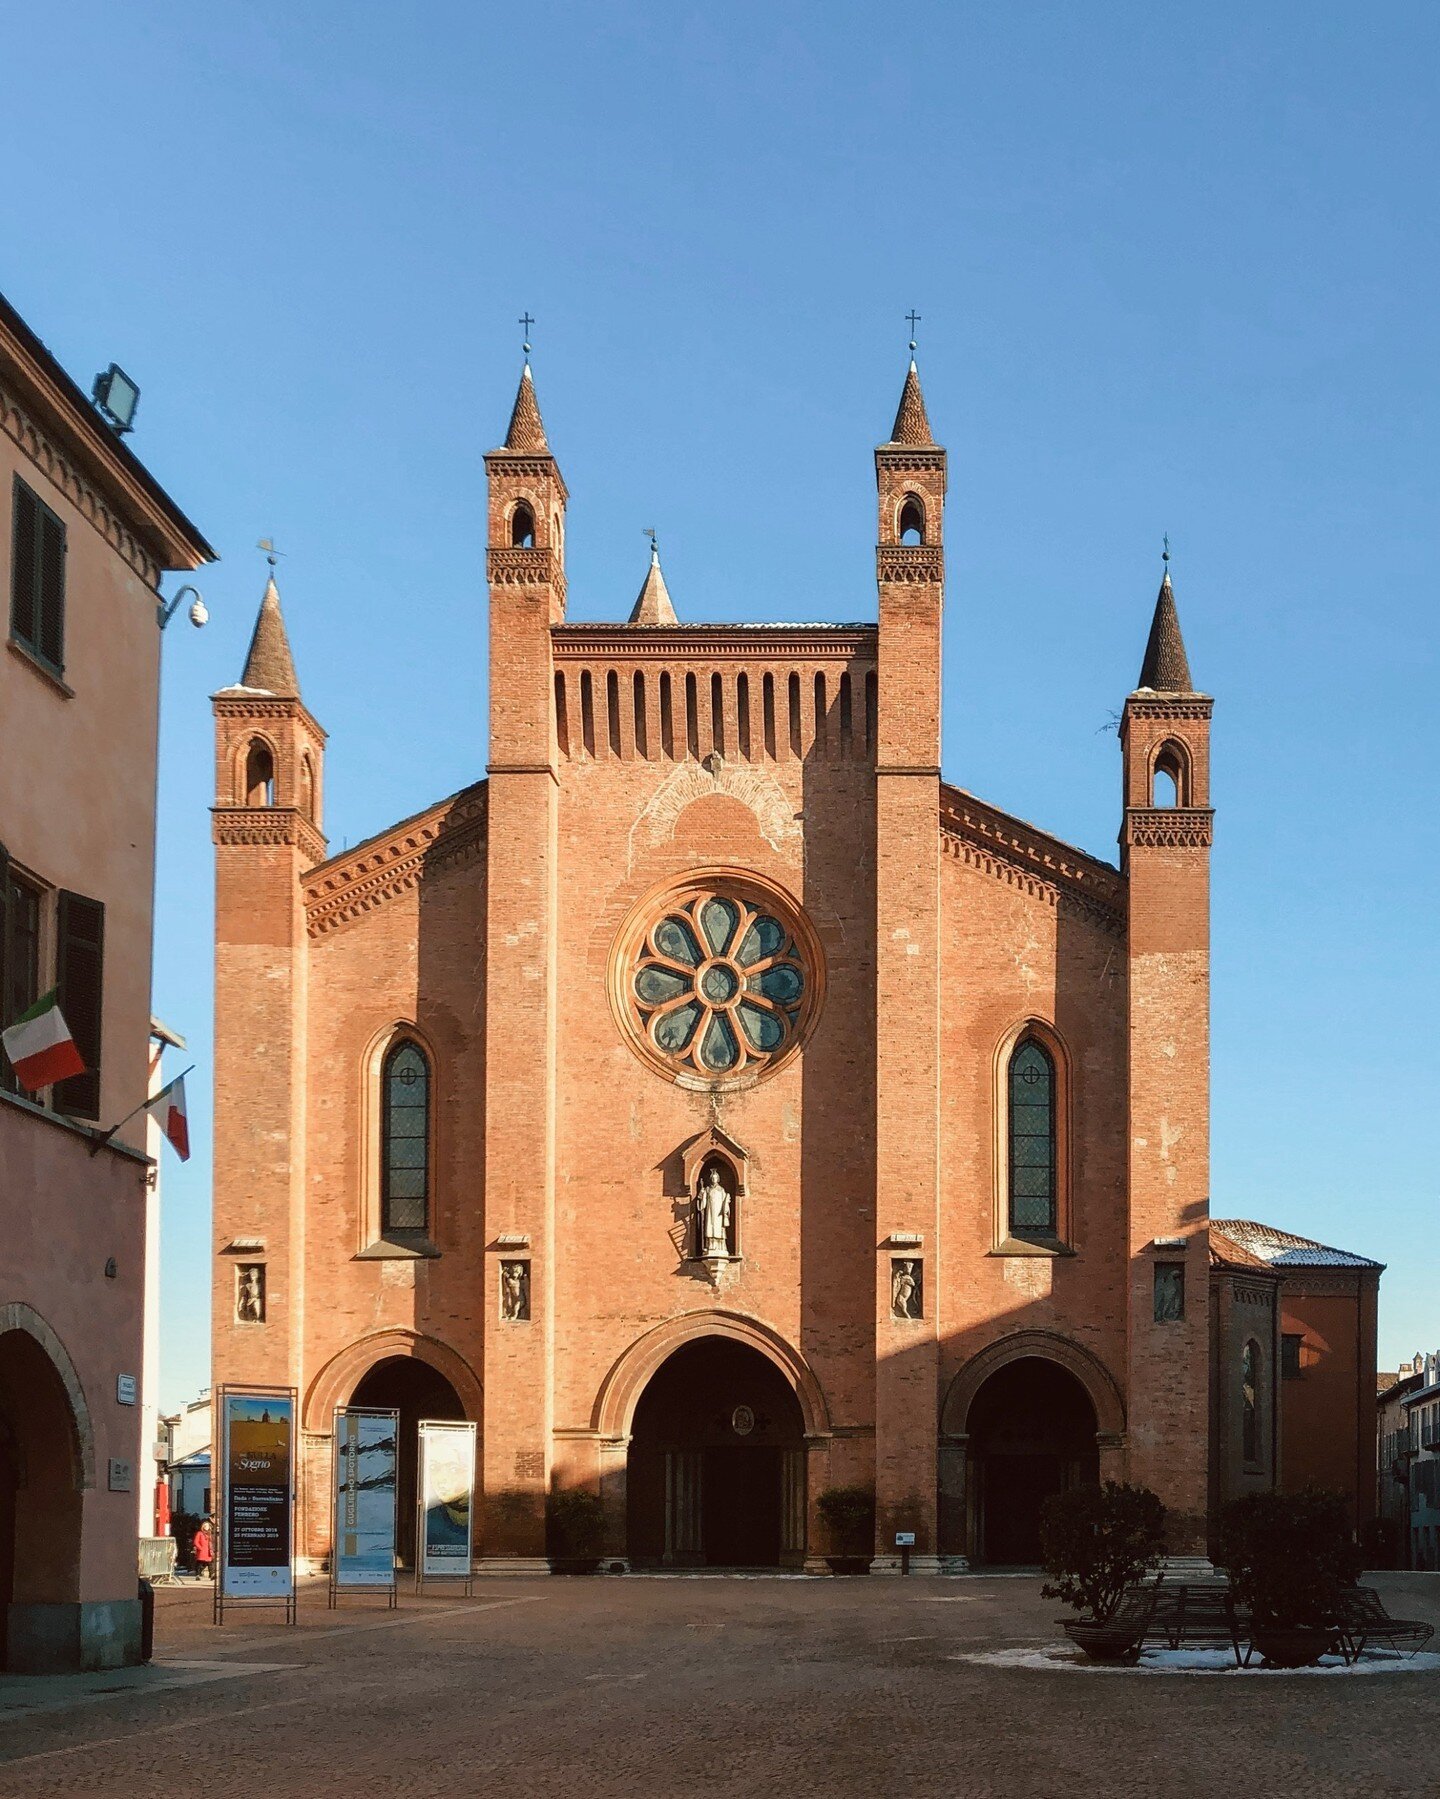 The facade of the cathedral of San Lorenzo has become the protagonist of a legend handed down by the people of Alba about the origin of the name Alba by referring precisely to the decorations on the facade of the cathedral of San Lorenzo: four statue